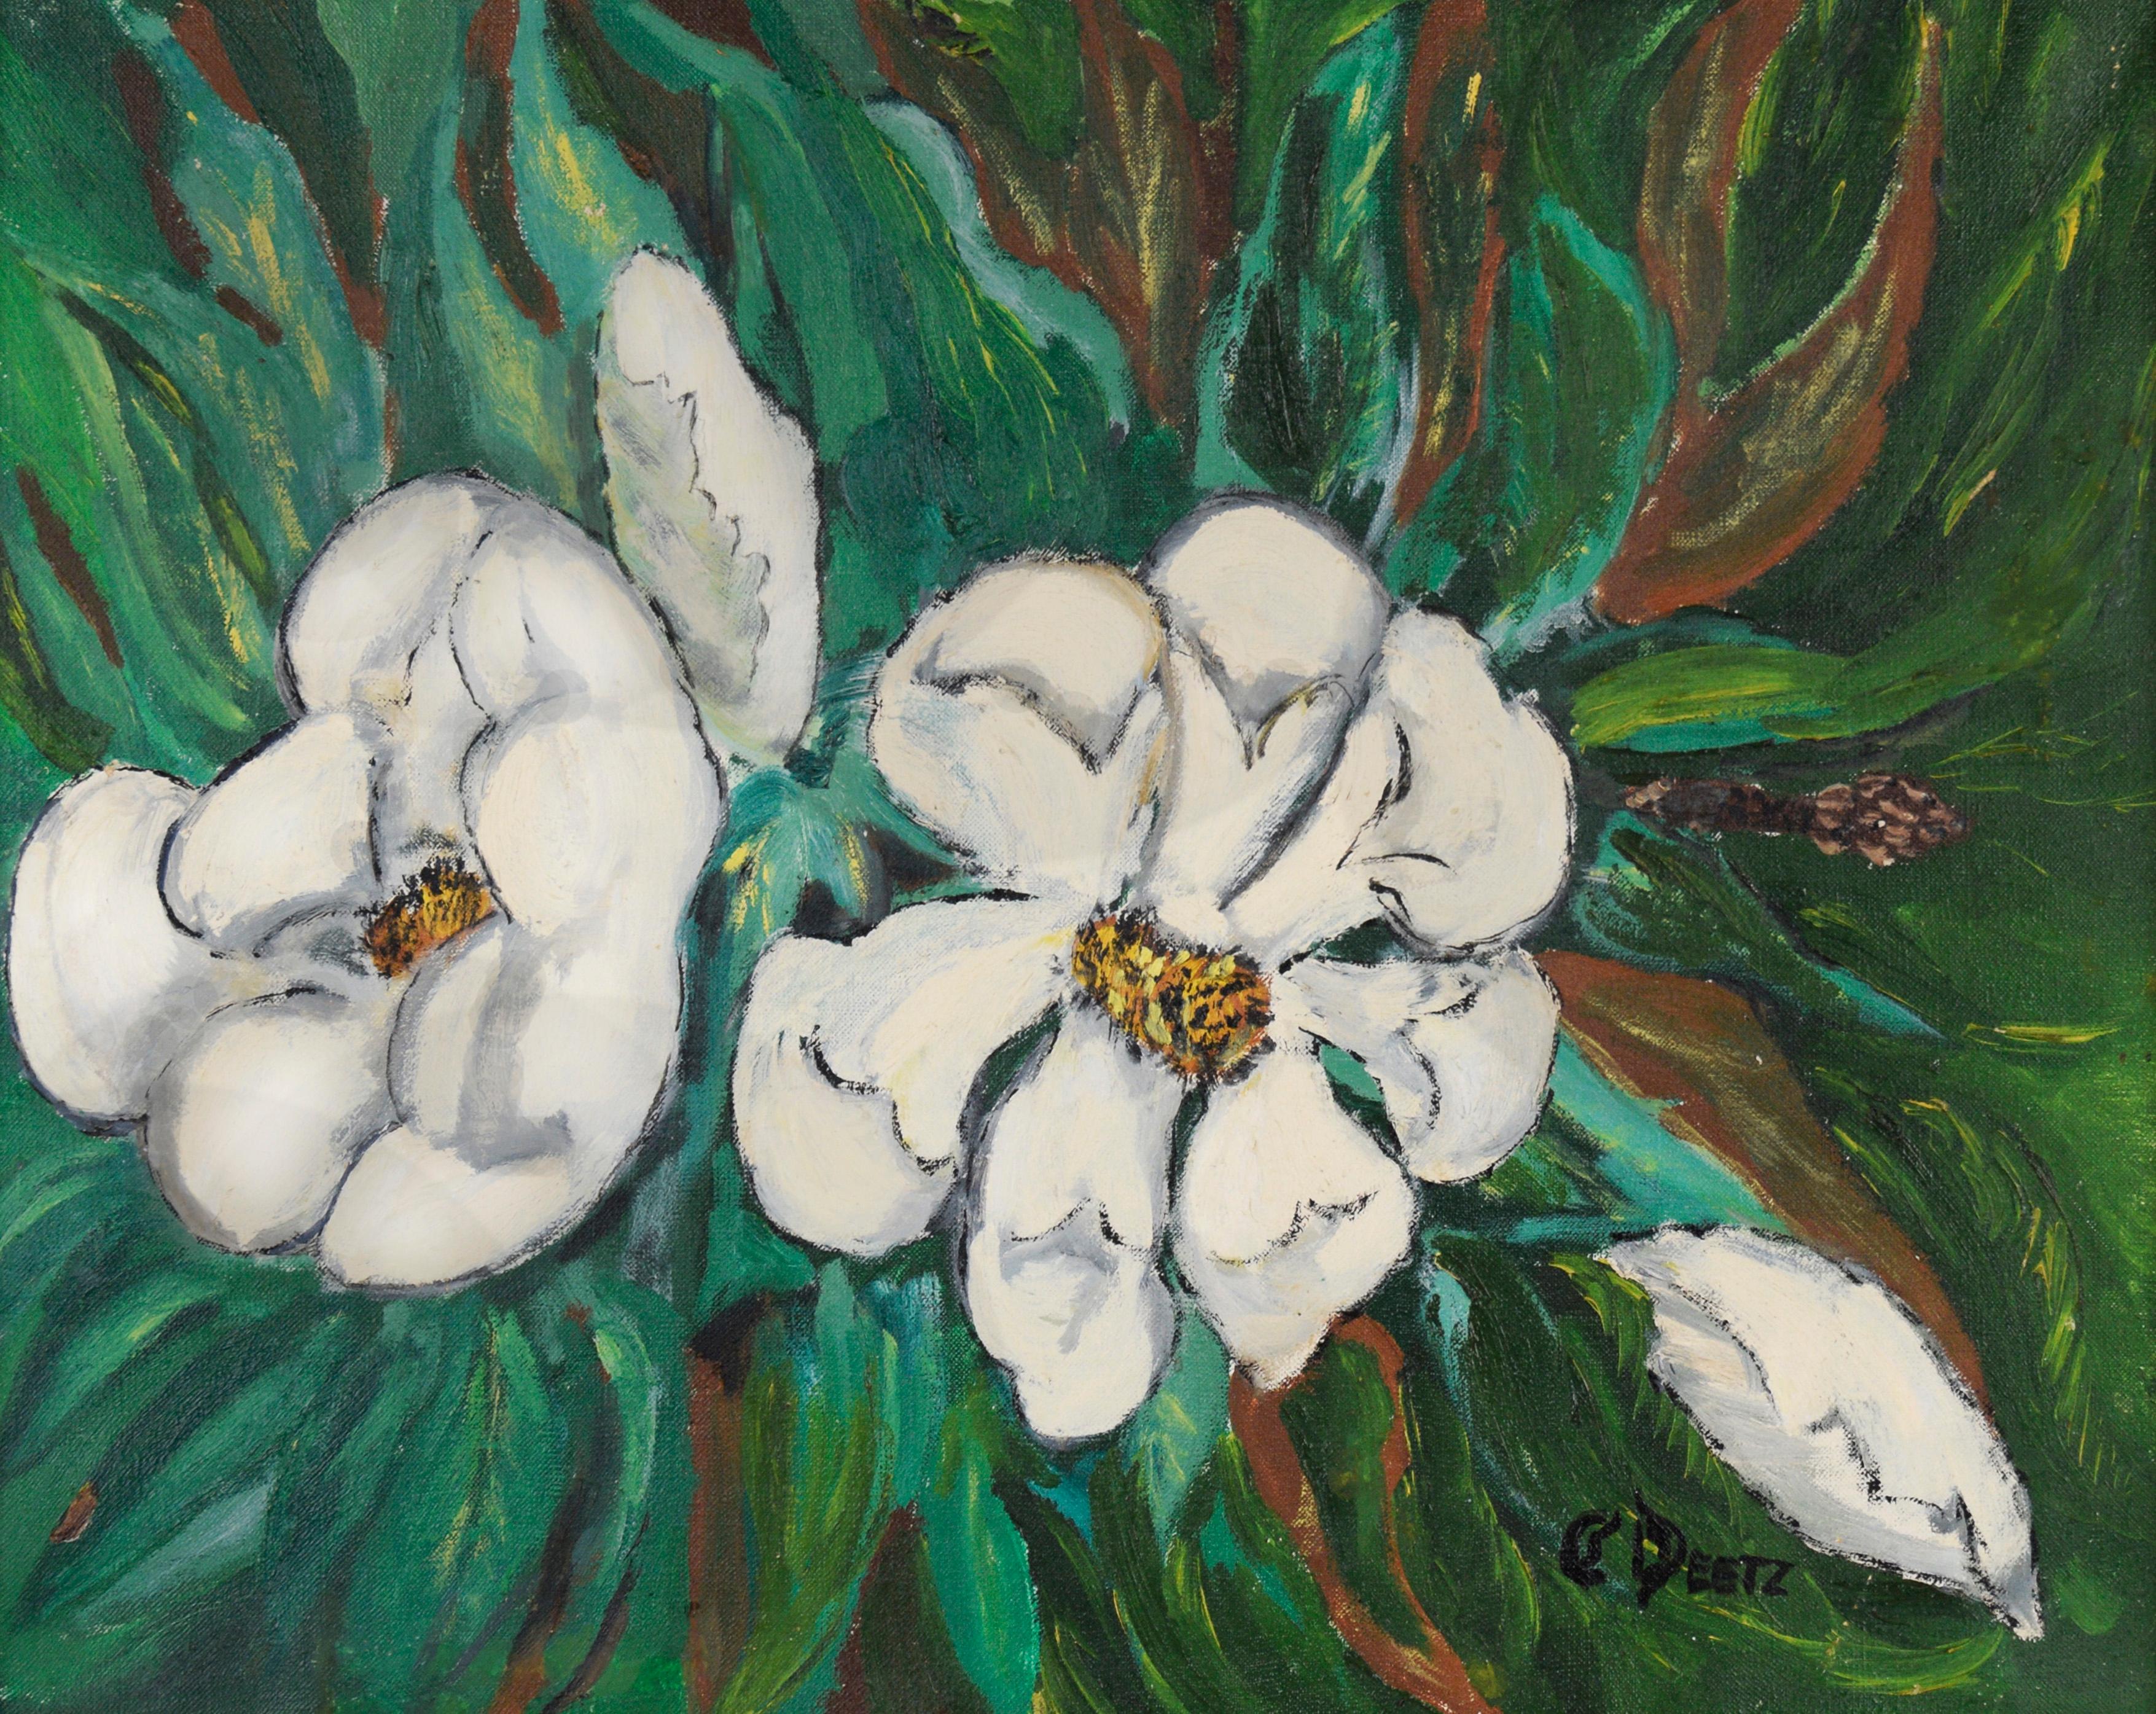 Modernist Southern Magnolia Original Oil Painting

Rich hues of emerald green and soft yellow highlights frame Southern Magnolias (“Magnolia Grandiflora”, also known as Bull Bay) in this original oil painting. This painting will make a wonderful